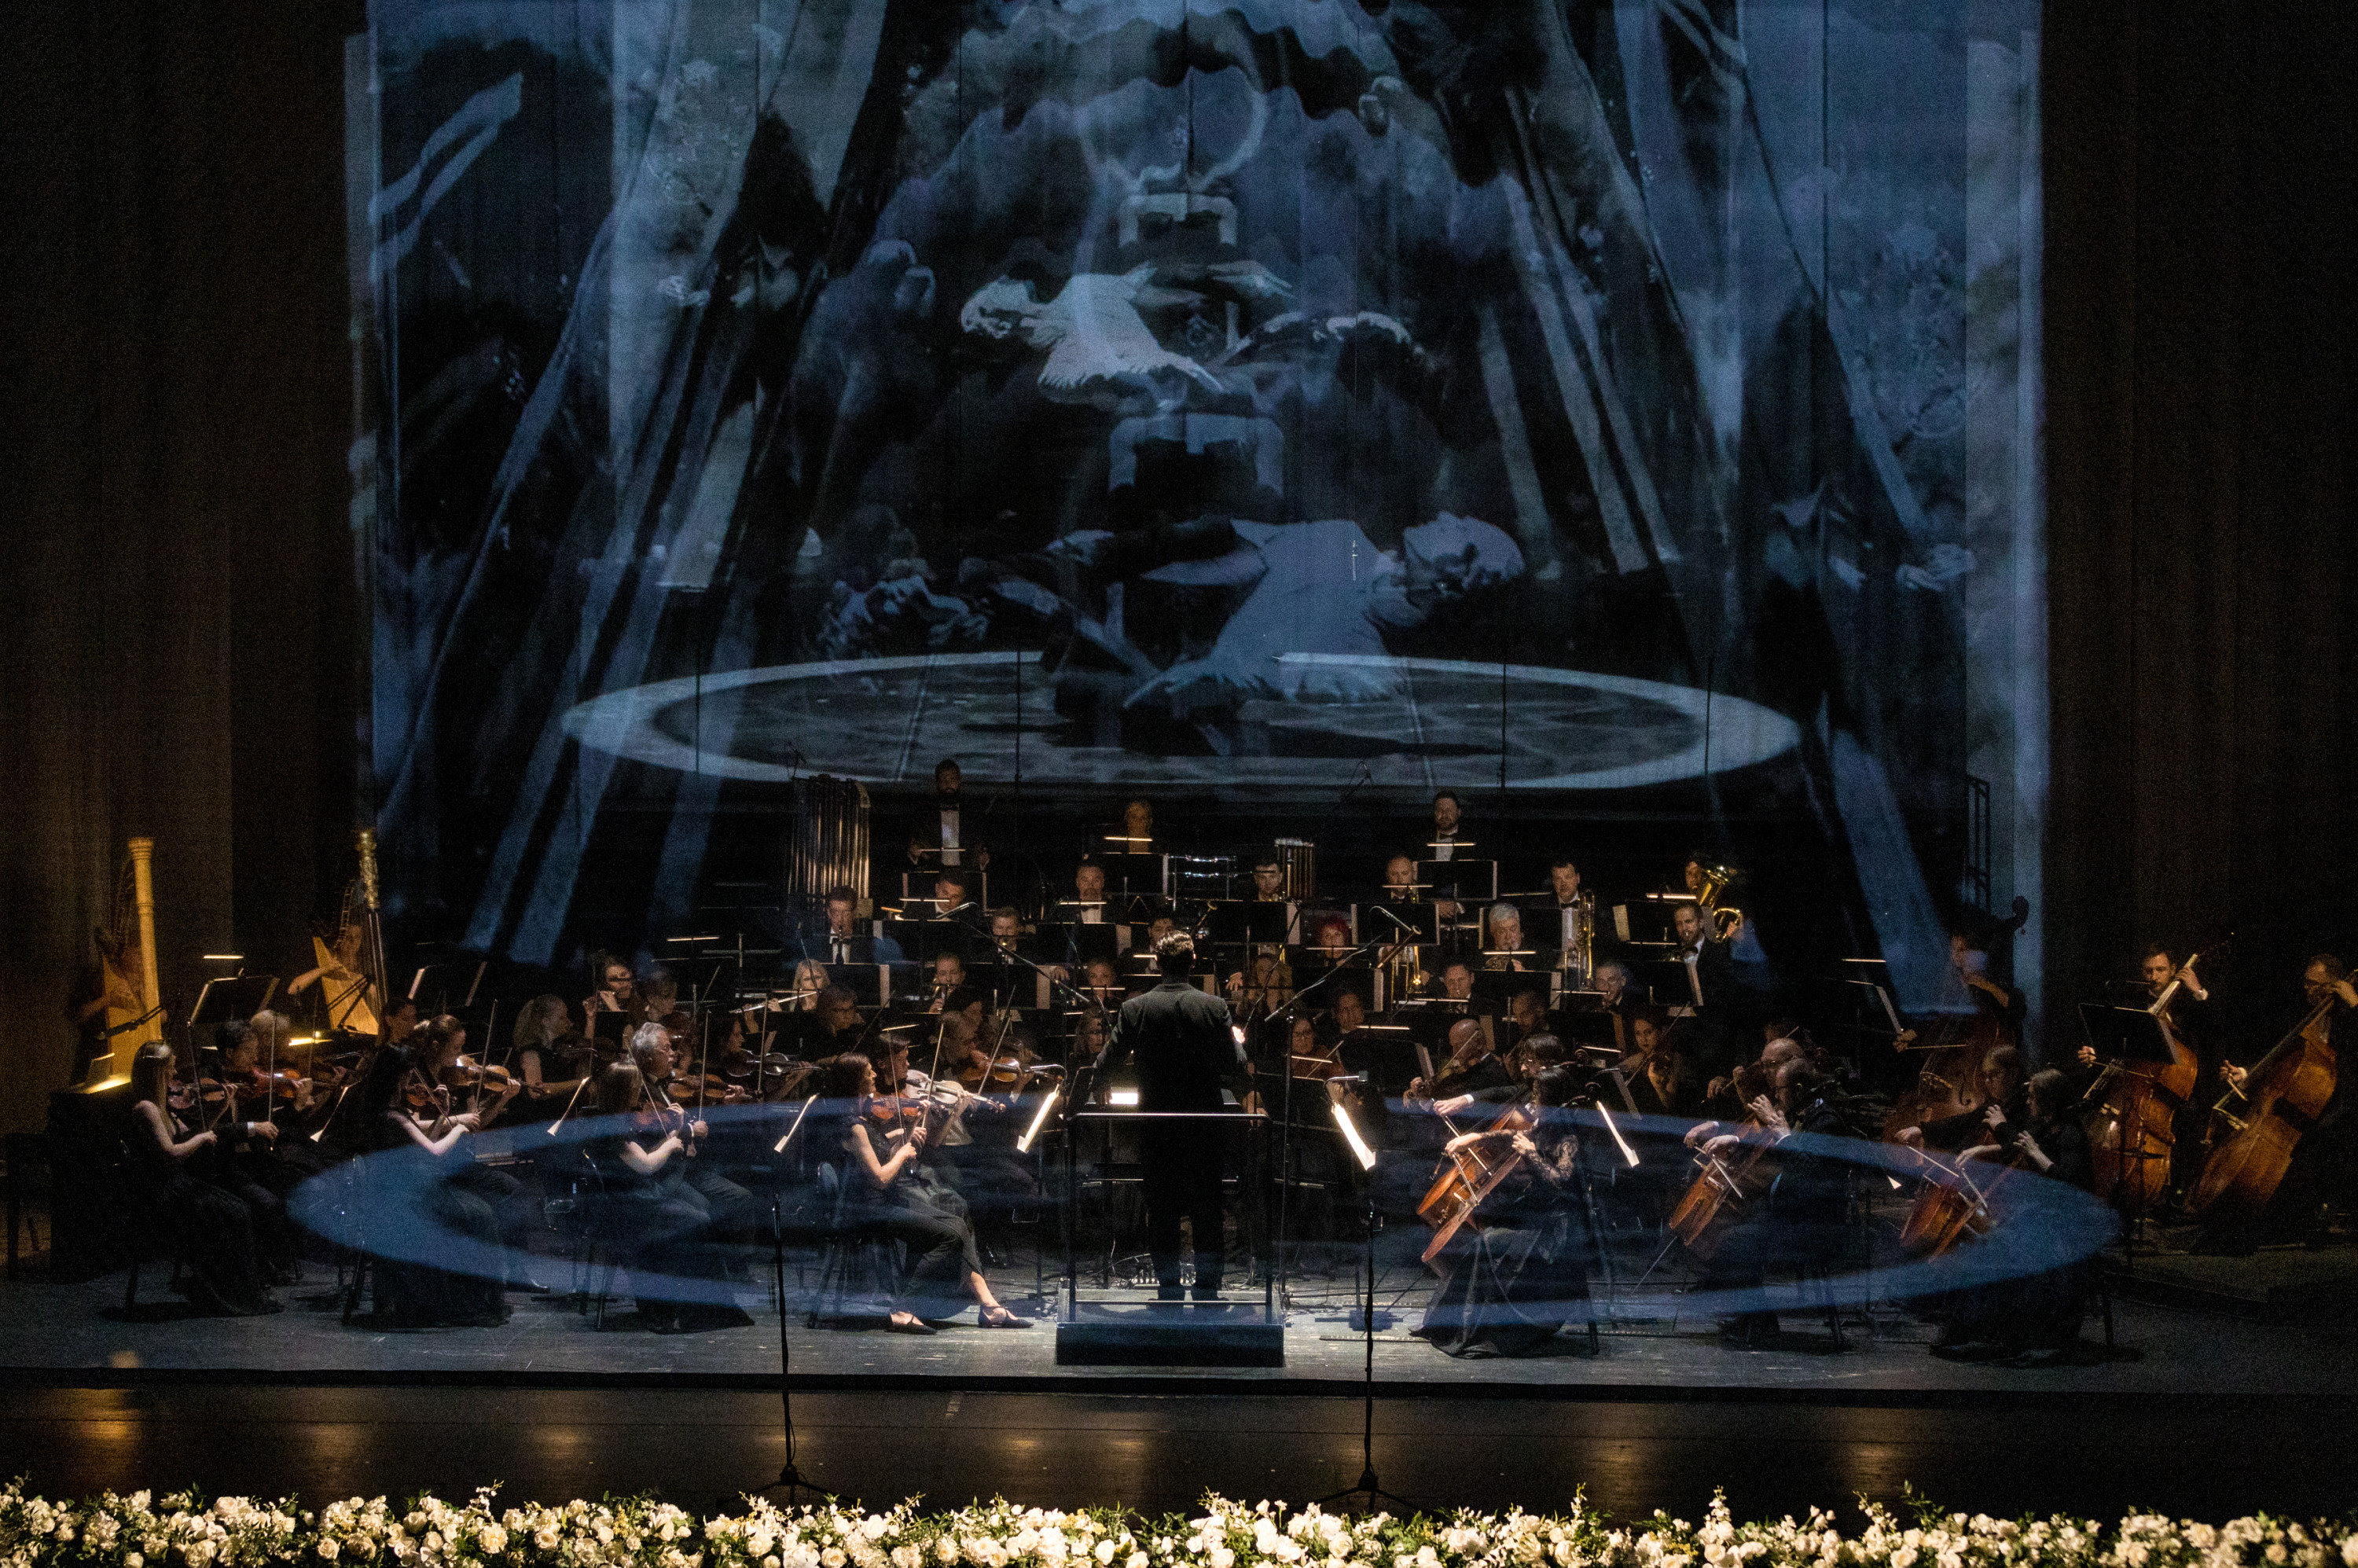 Farewell to the season 2022/2023 of the Latvian National Opera and Ballet